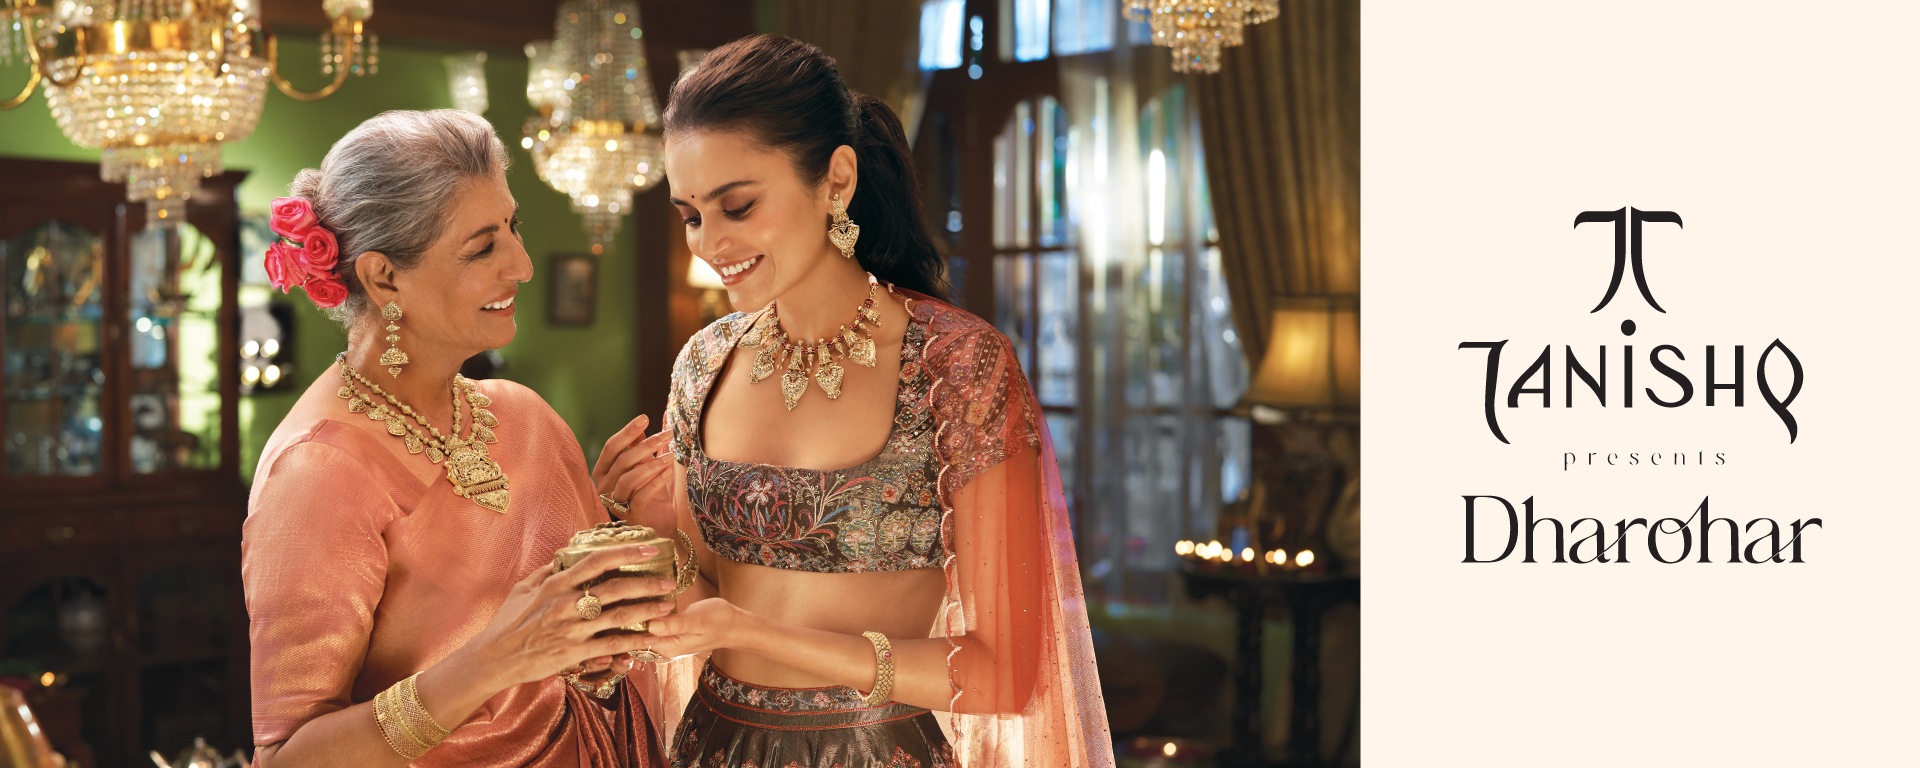 Gift someone their first diamond, says new Tanishq campaign – Firstpost